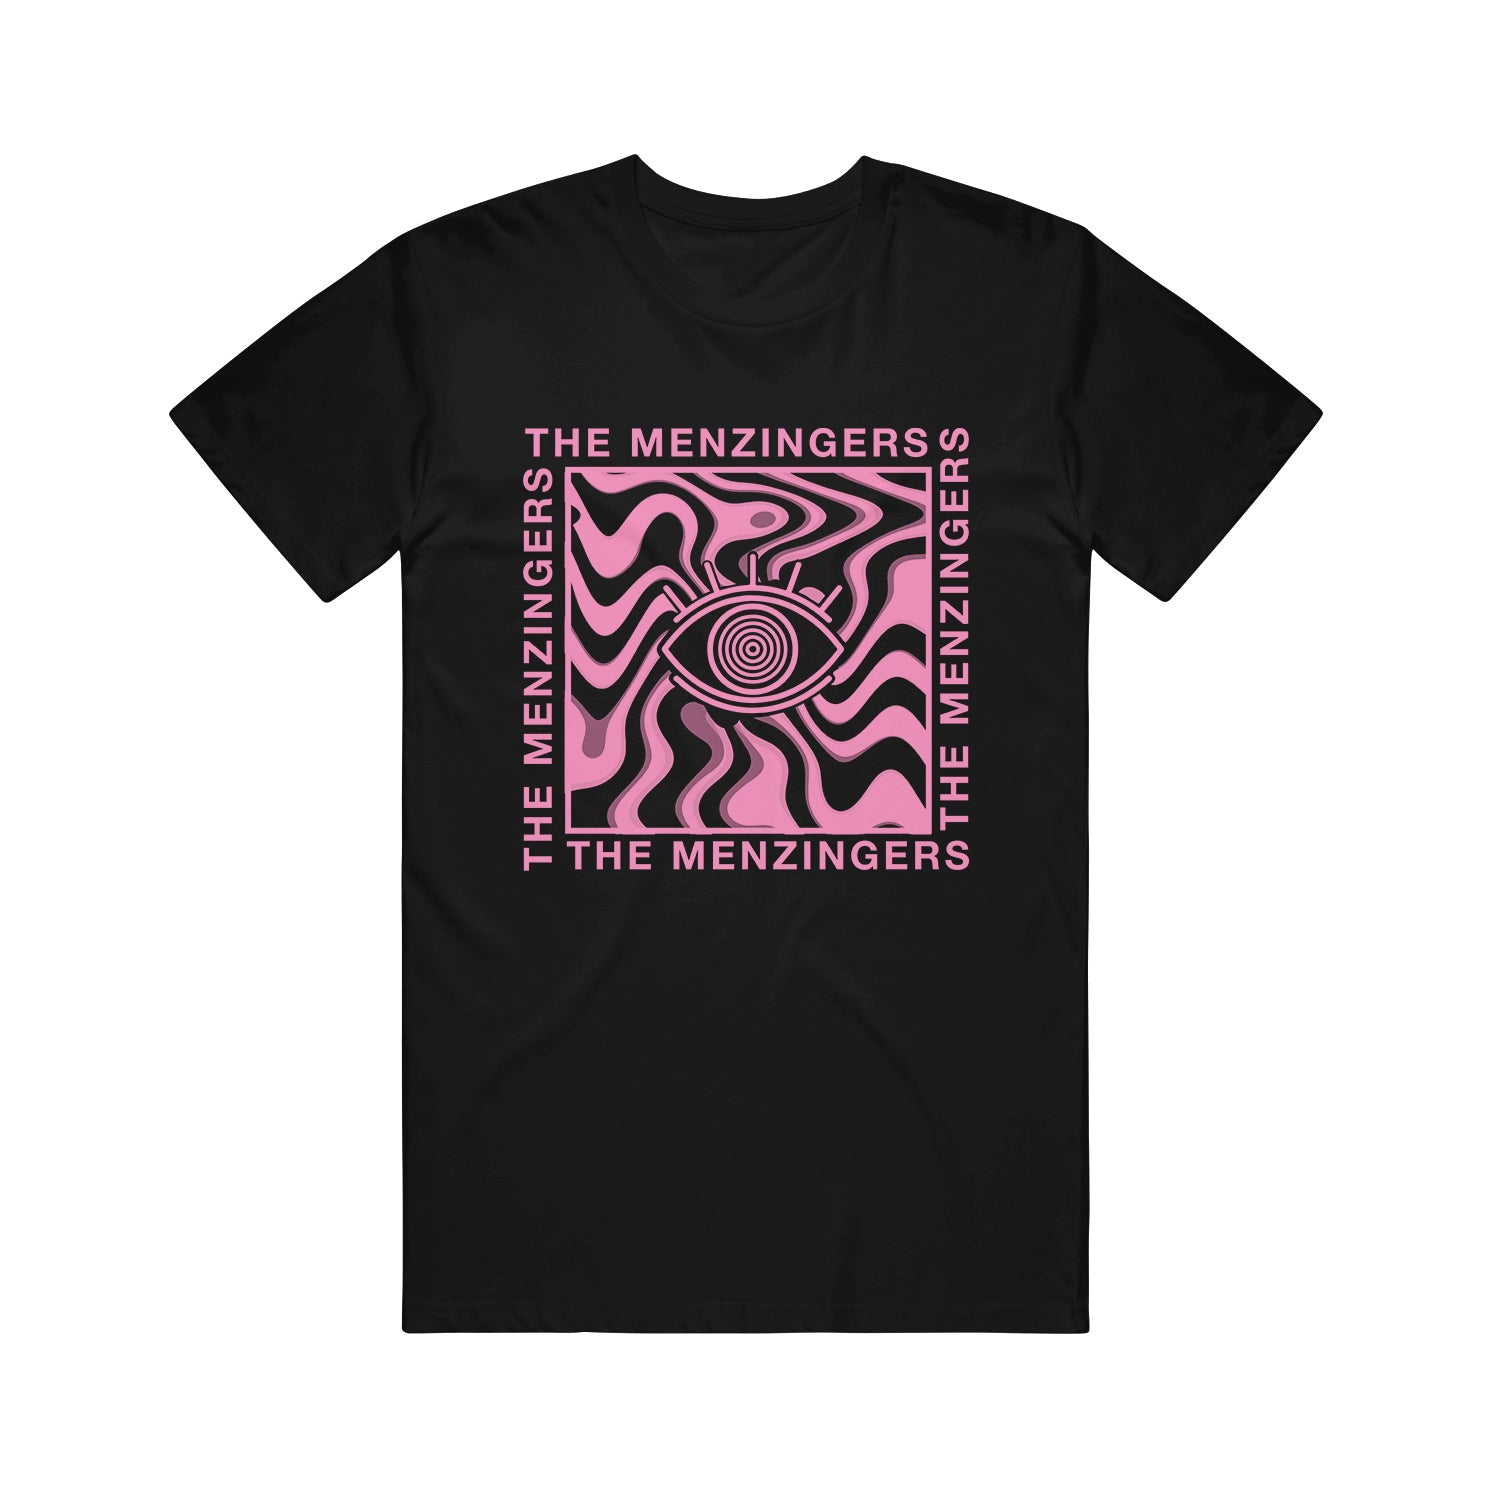 image of a black tee shirt on a white background. tee has a full center chest print in pink of a square with an eye ball in the center and wavy pattern around it. on the outside of the square on each side says the menzingers